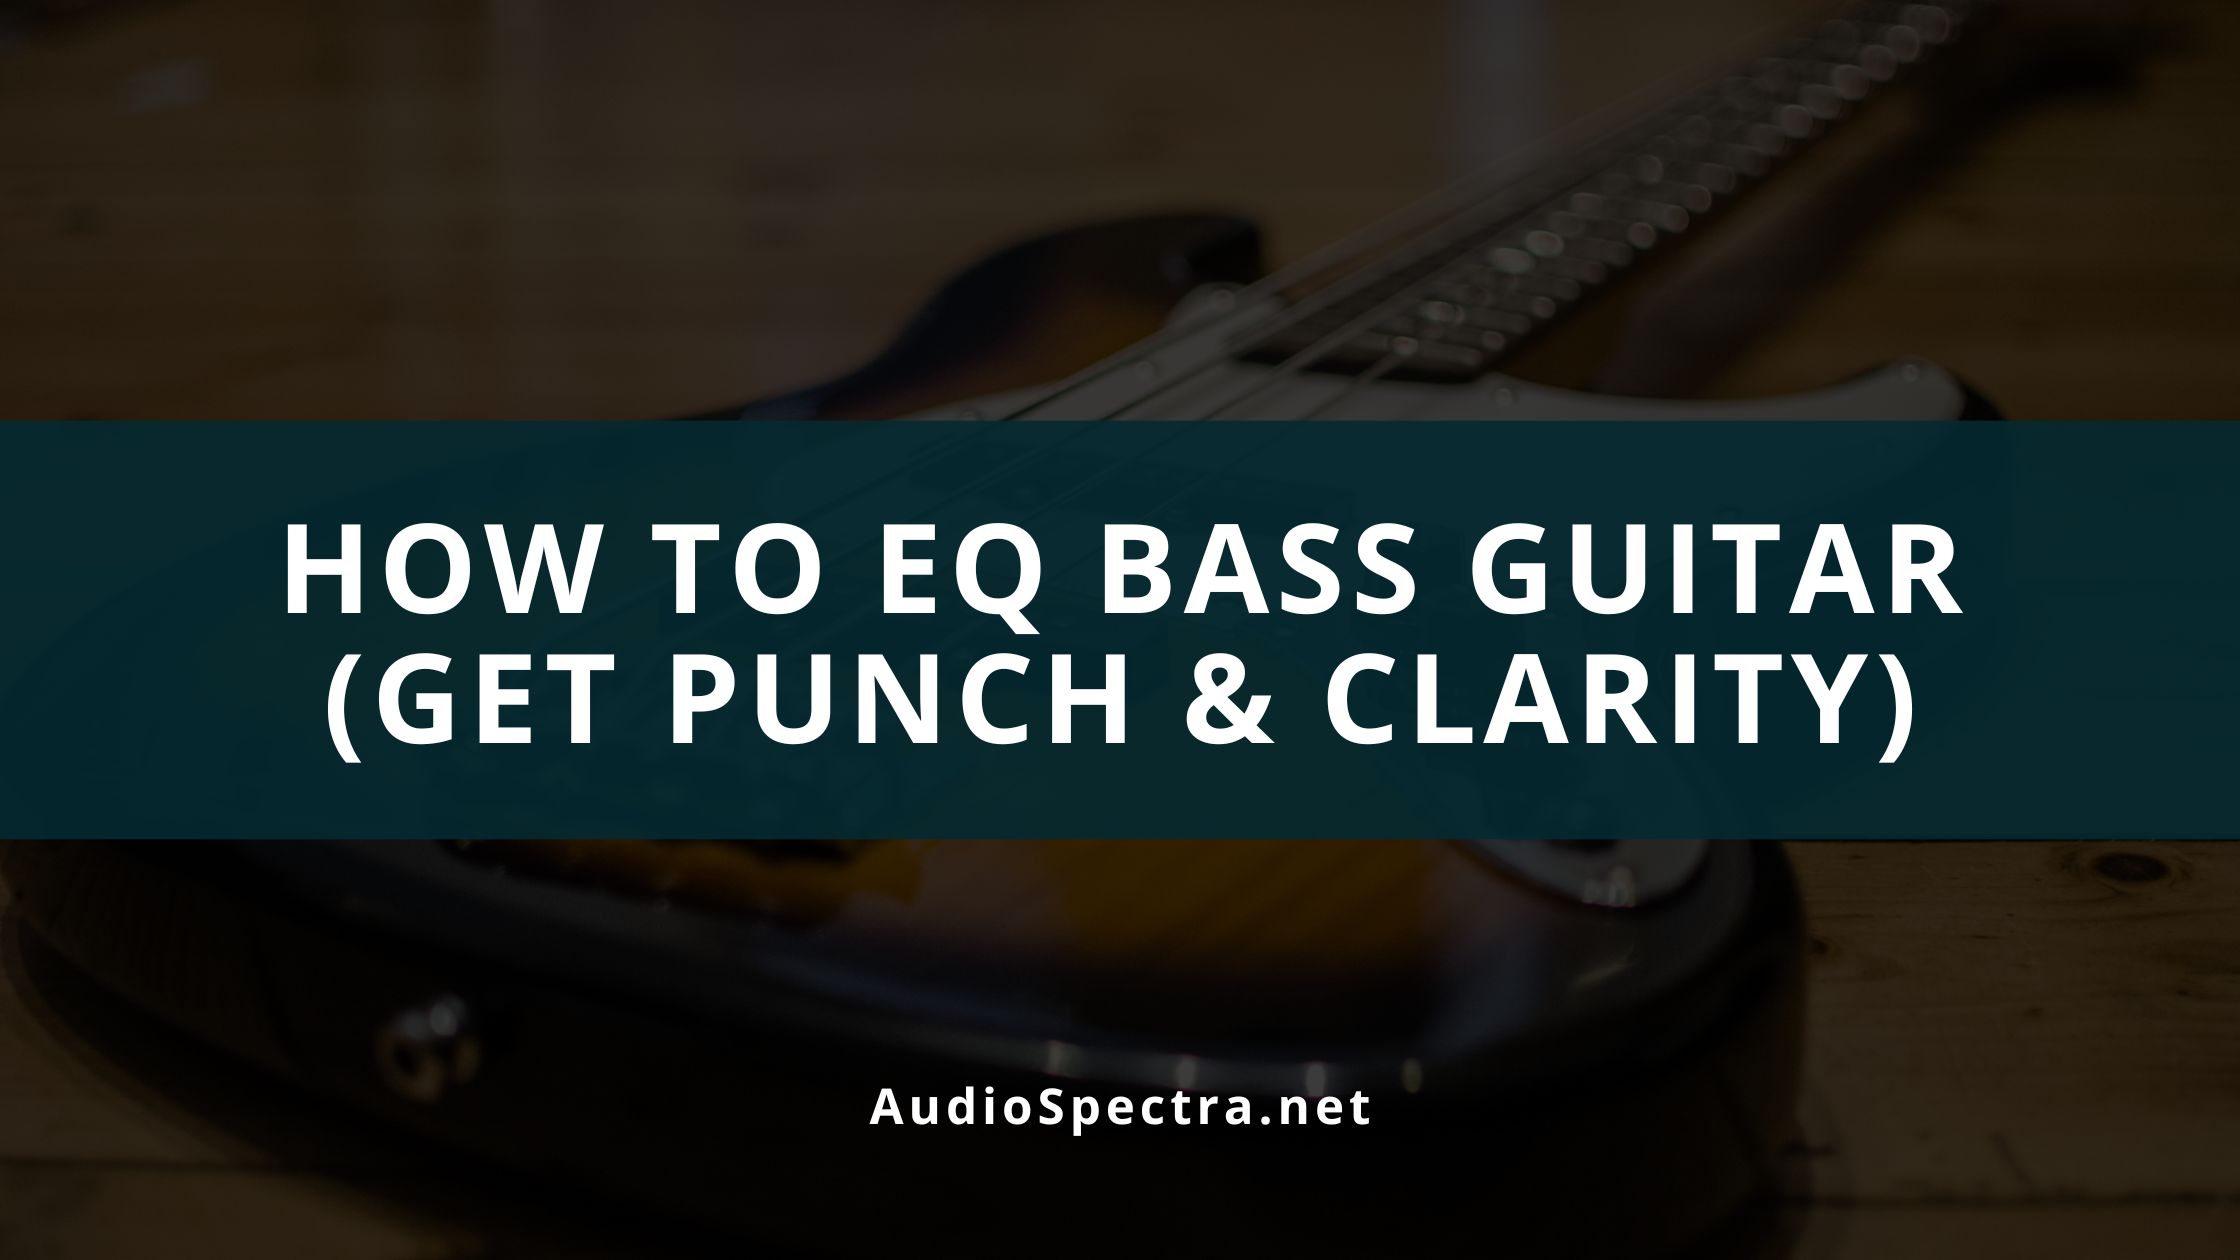 How To EQ Bass Guitar (Get Punch & Clarity)